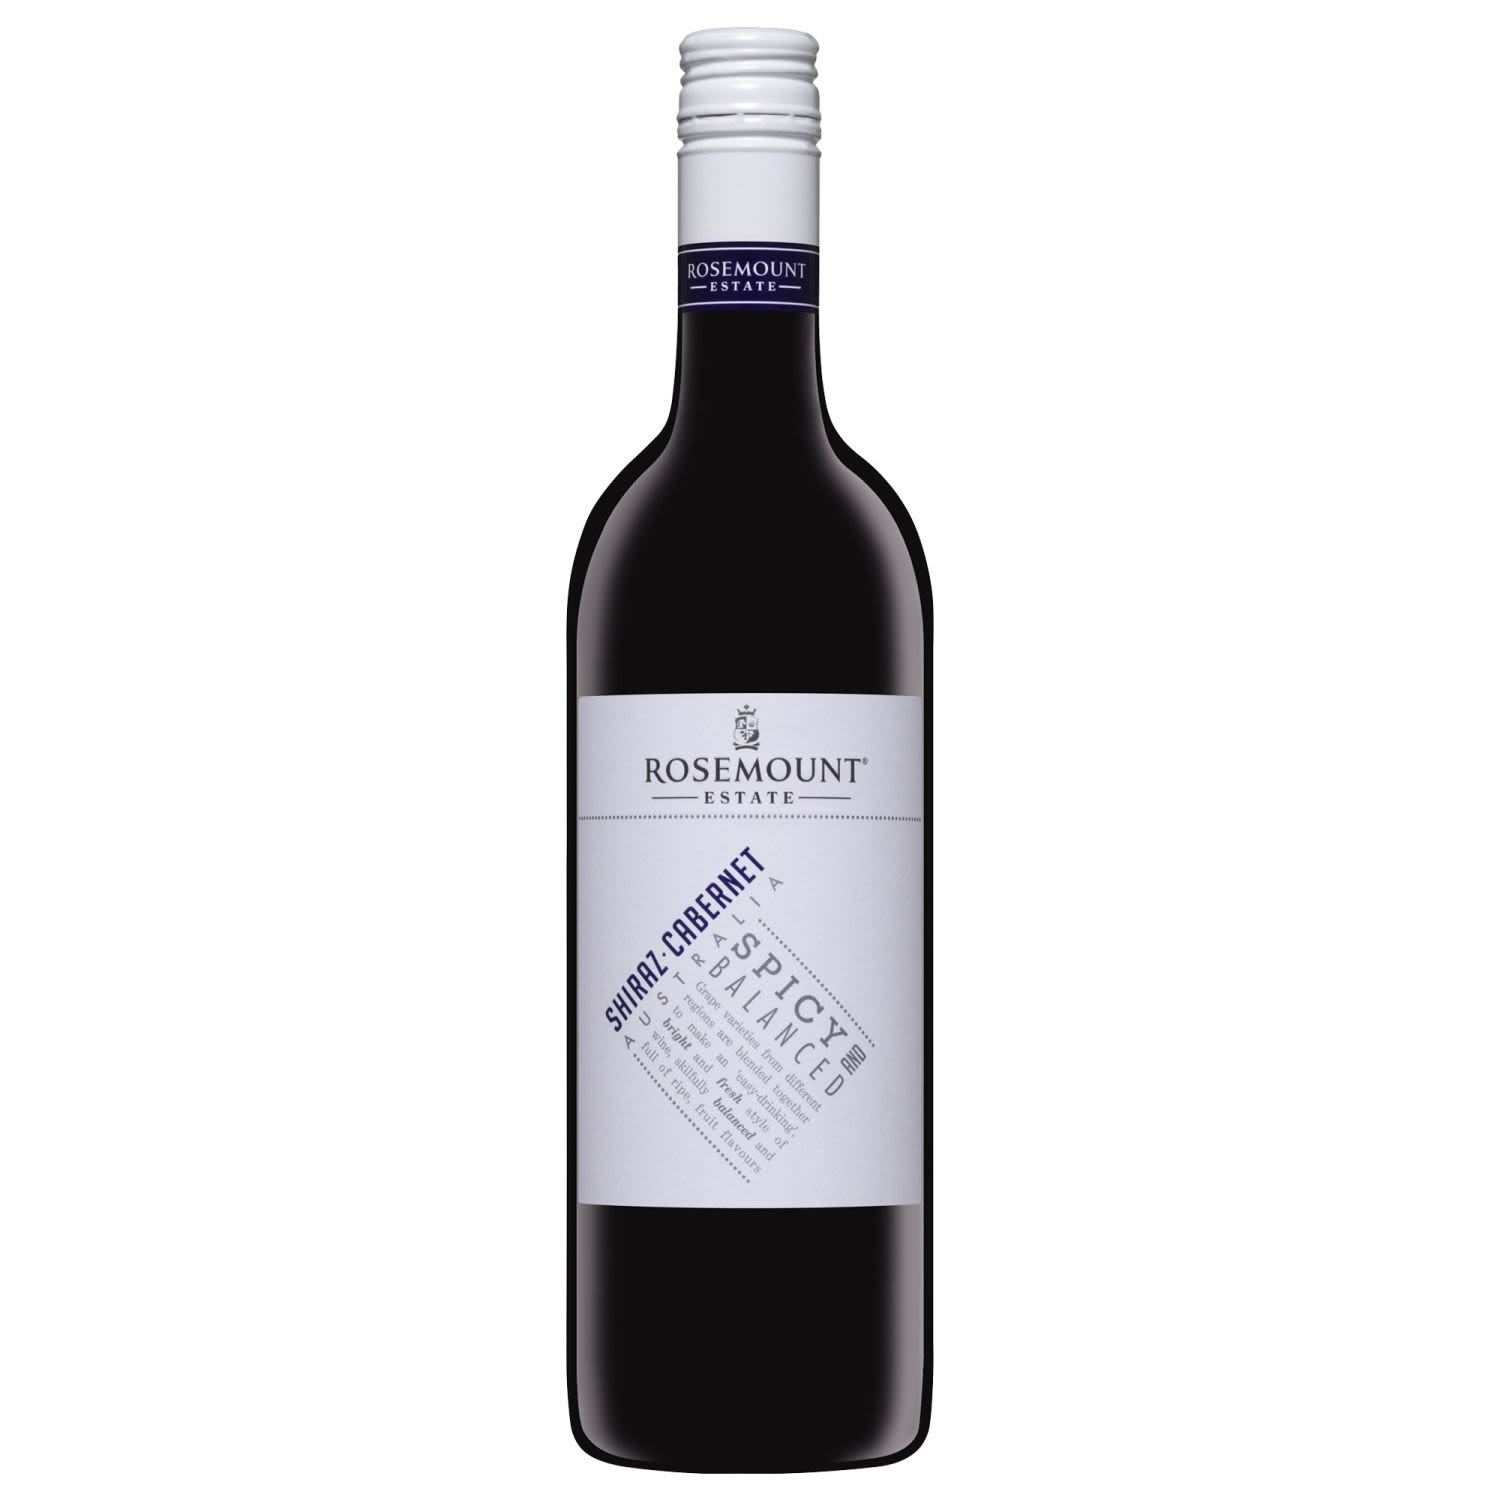 The bright, spicy nose shows notes of dark chocolate, liquorice, blackberry & mint. Full bodied wine with bright flavours of spice, rich chocolate, blackberry cassis & mint. Well integrated, subtle, great balance & soft.<br /> <br />Alcohol Volume: 13.50%<br /><br />Pack Format: Bottle<br /><br />Standard Drinks: 8</br /><br />Pack Type: Bottle<br /><br />Country of Origin: Australia<br /><br />Region: South Eastern Australia<br /><br />Vintage: '2012<br />